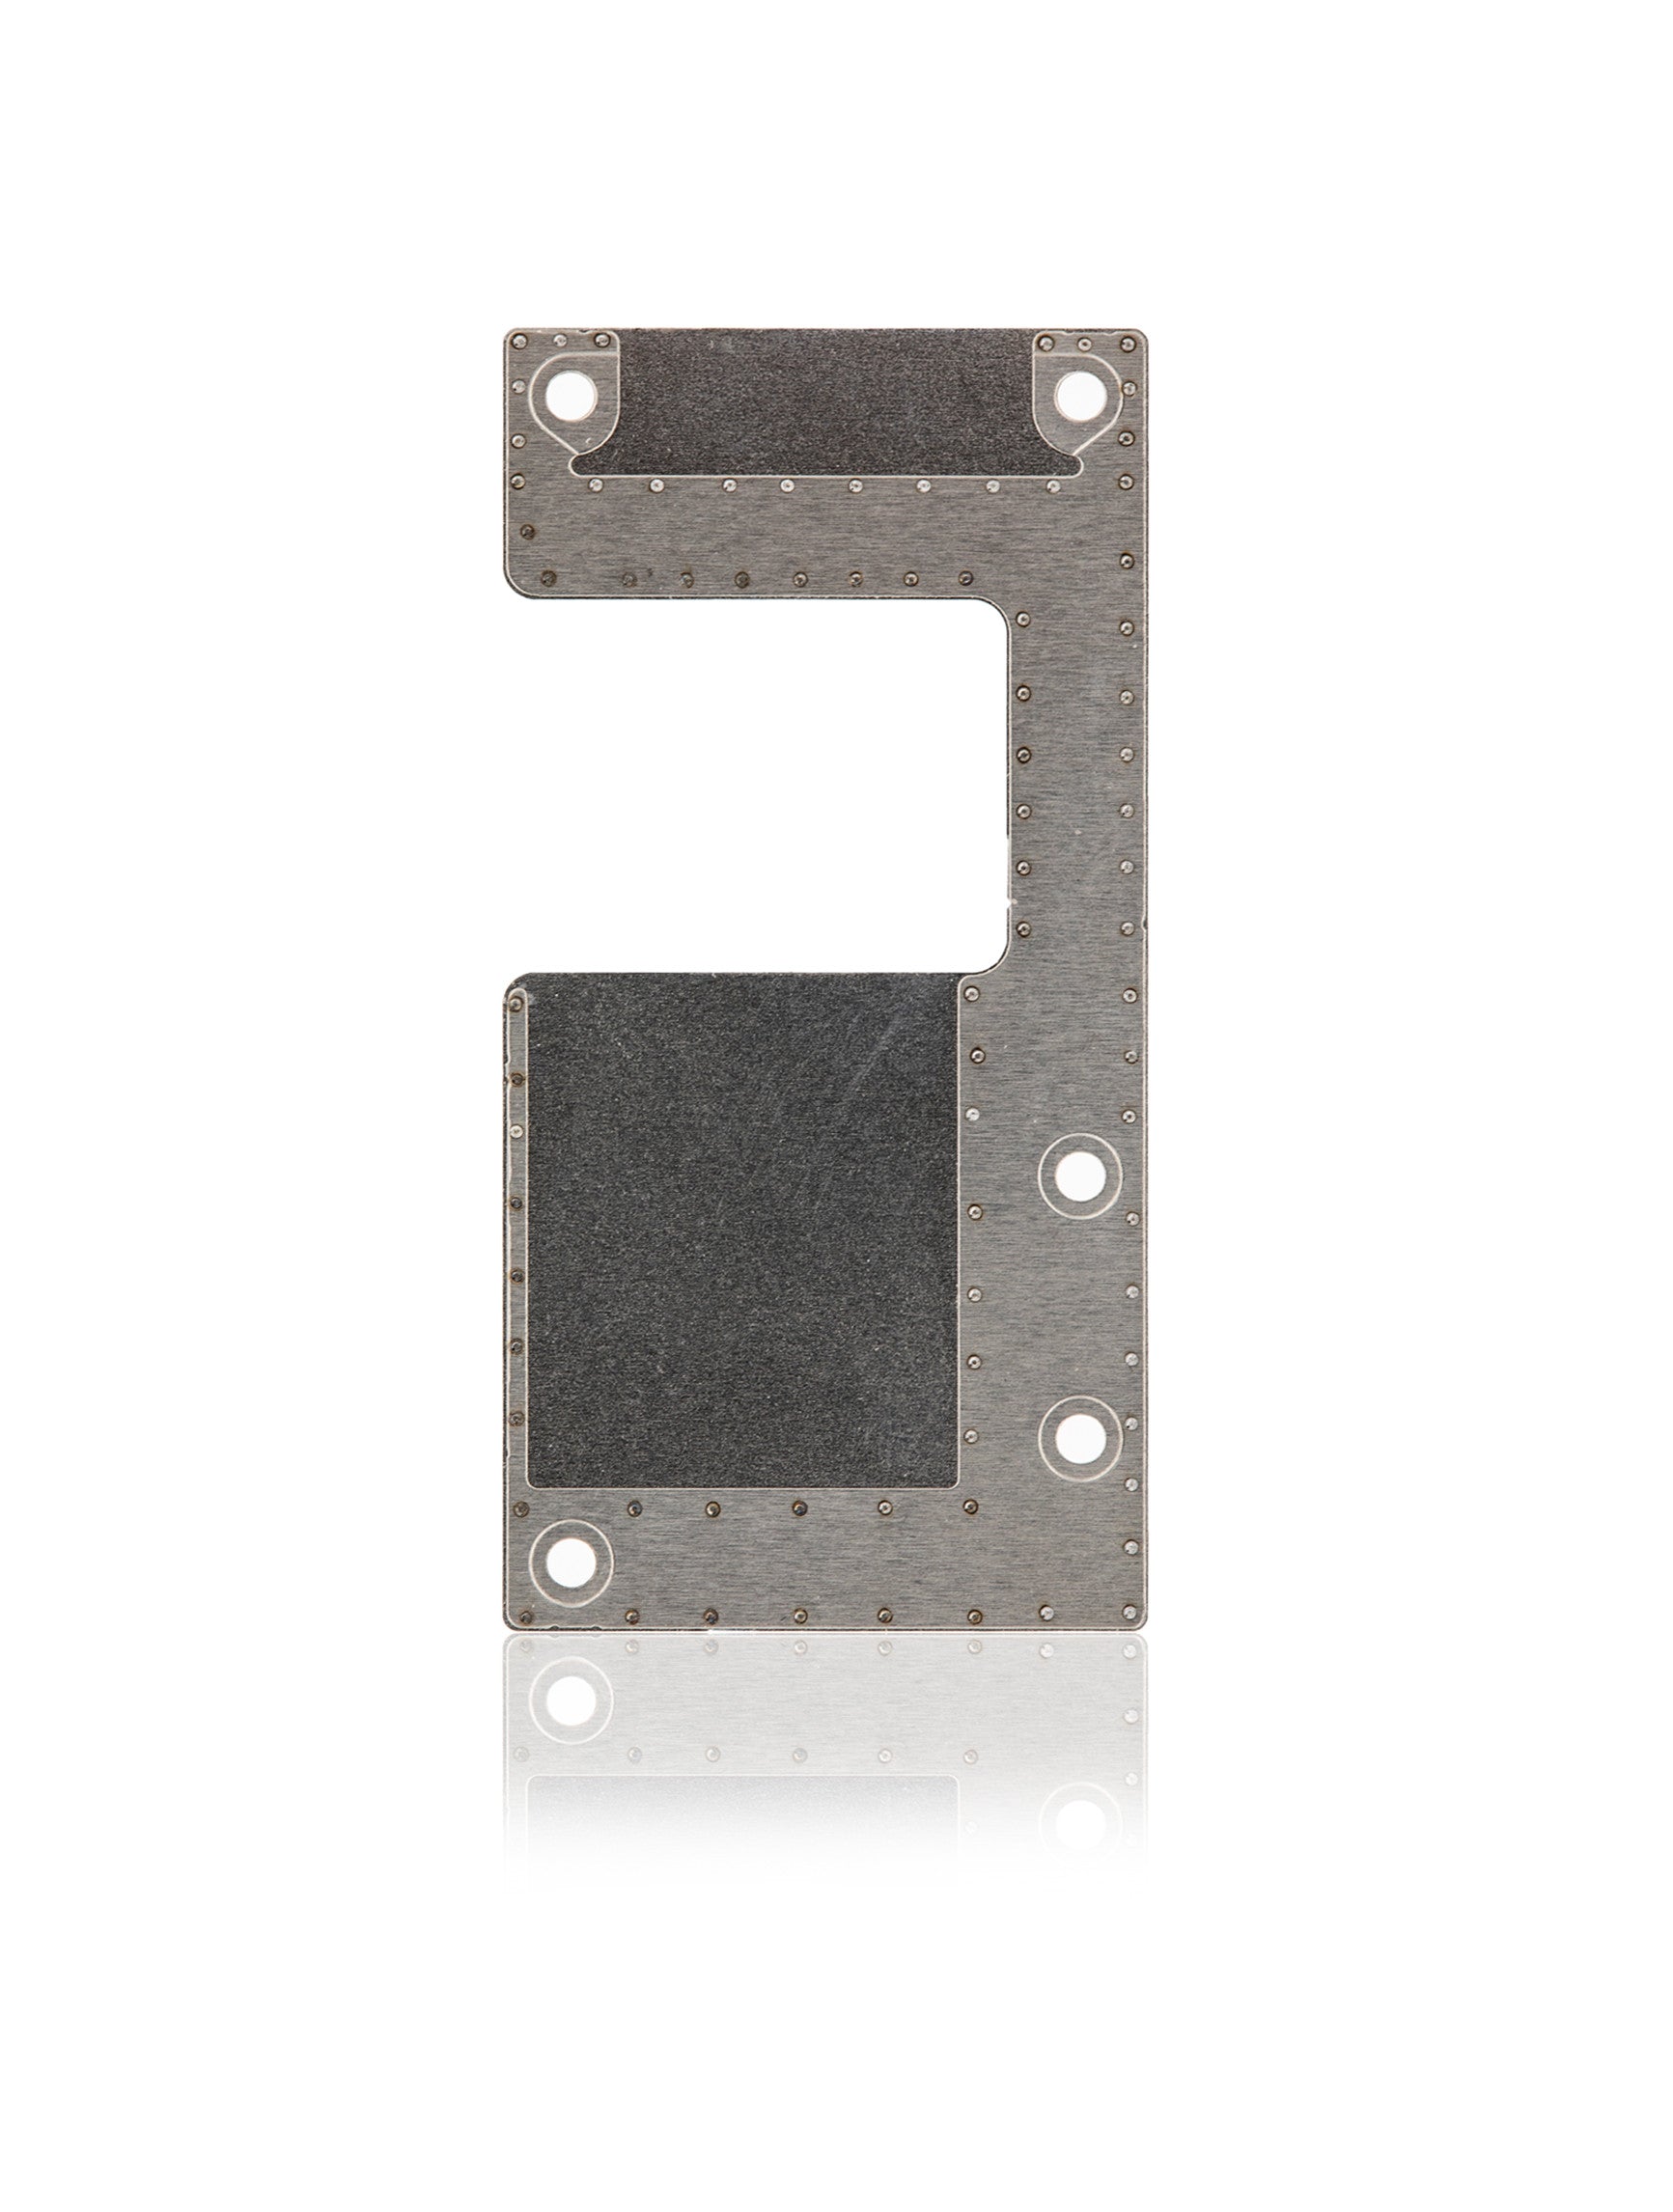 LCD / CAMERA FLEX CABLE HOLDING BRACKET FOR IPHONE 11 (BIG)